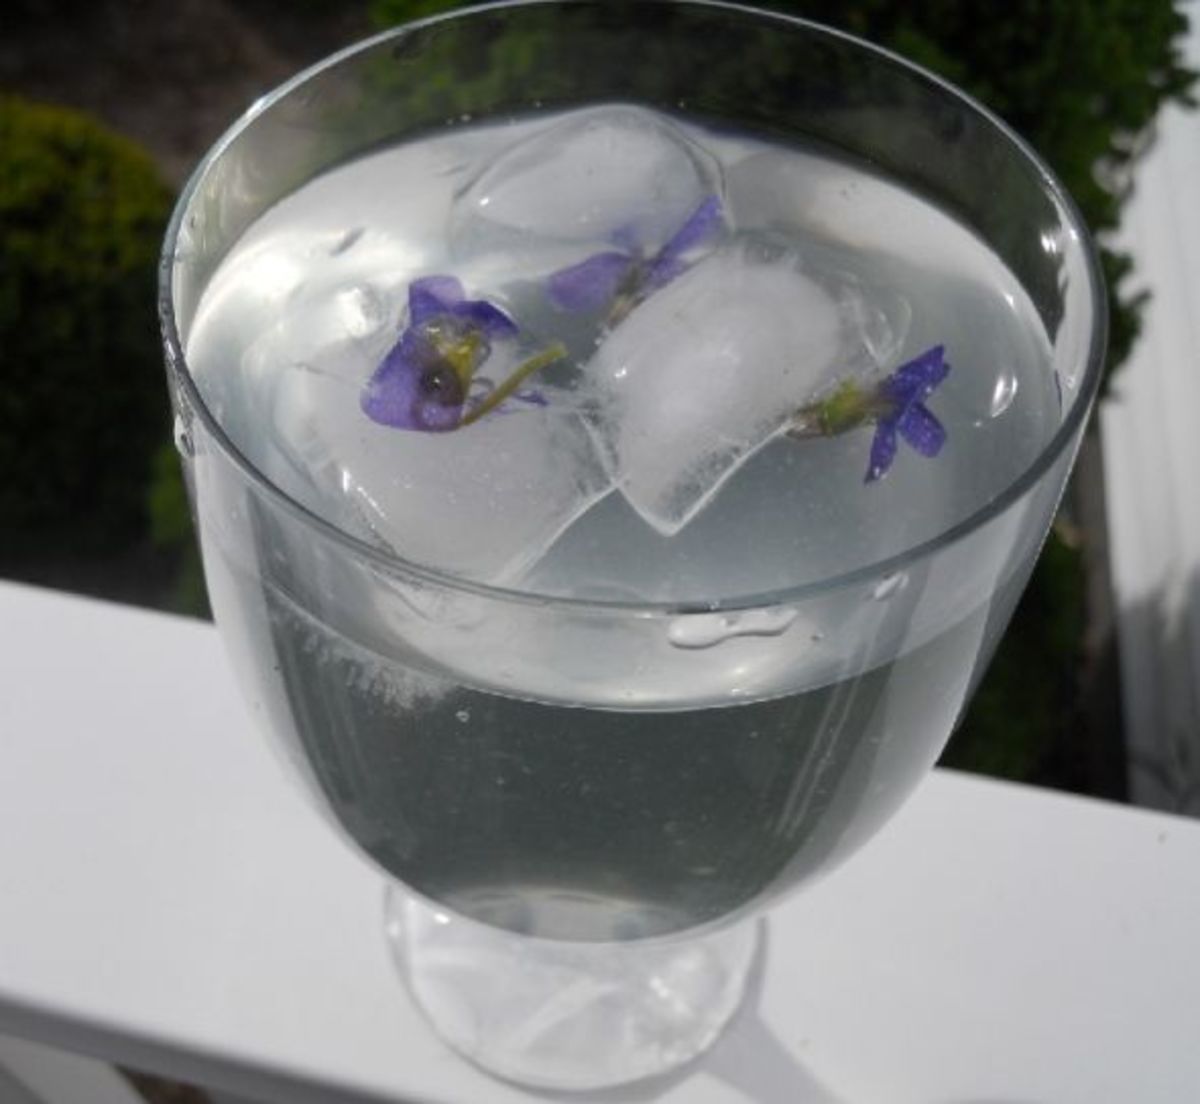 Violets With Ice Cubes Melting and Violets Floating in Drink - A Disaster 